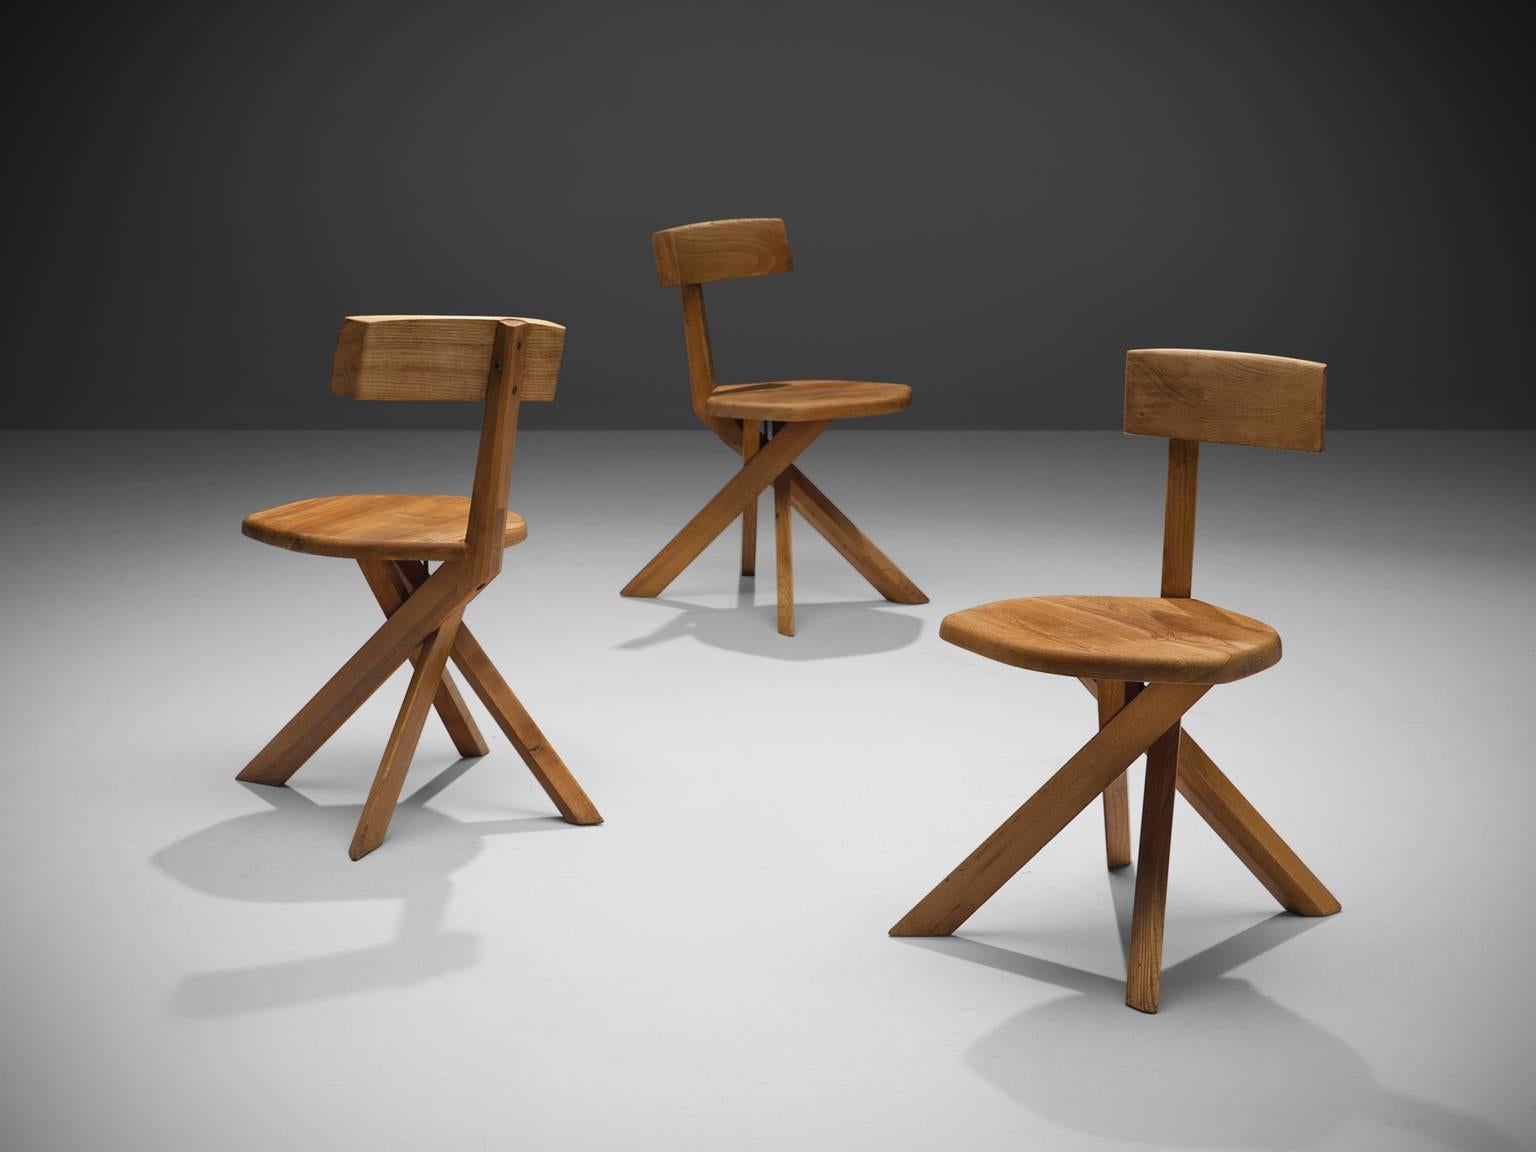 Pierre Chapo, three chairs S34, elm, France, 1960s.

These three asymmetrical chairs with twisted base are icons of Pierre Chapo's playful and solemn designs. The backrest is placed just slightly out of the middle, this imperfection has to result of